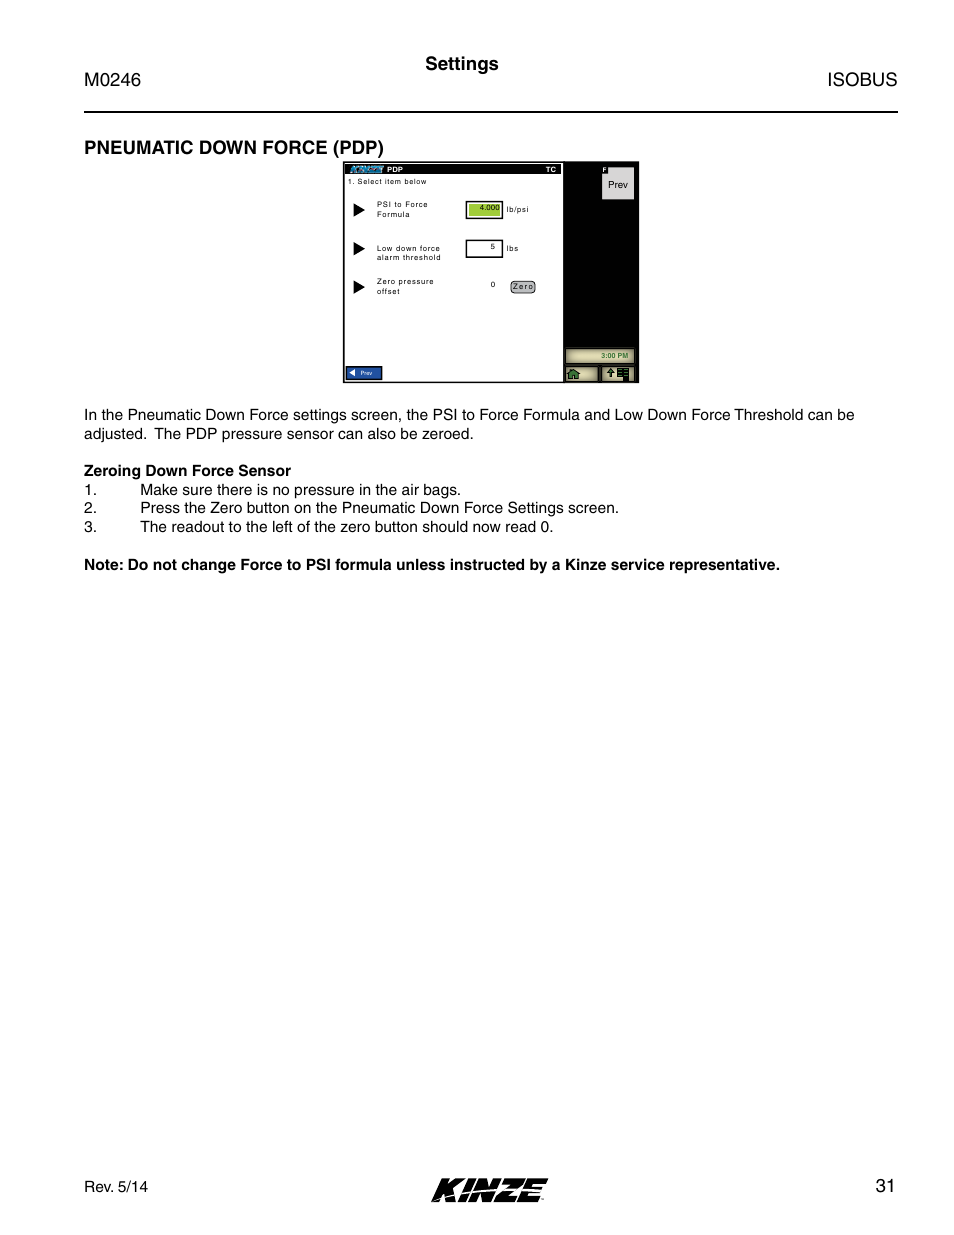 Pneumatic down force (pdp), Isobus m0246, 31 pneumatic down force (pdp) | Settings, Rev. 5/14 | Kinze ISOBUS Electronics Package (3000 Series) Rev. 5/14 User Manual | Page 37 / 46